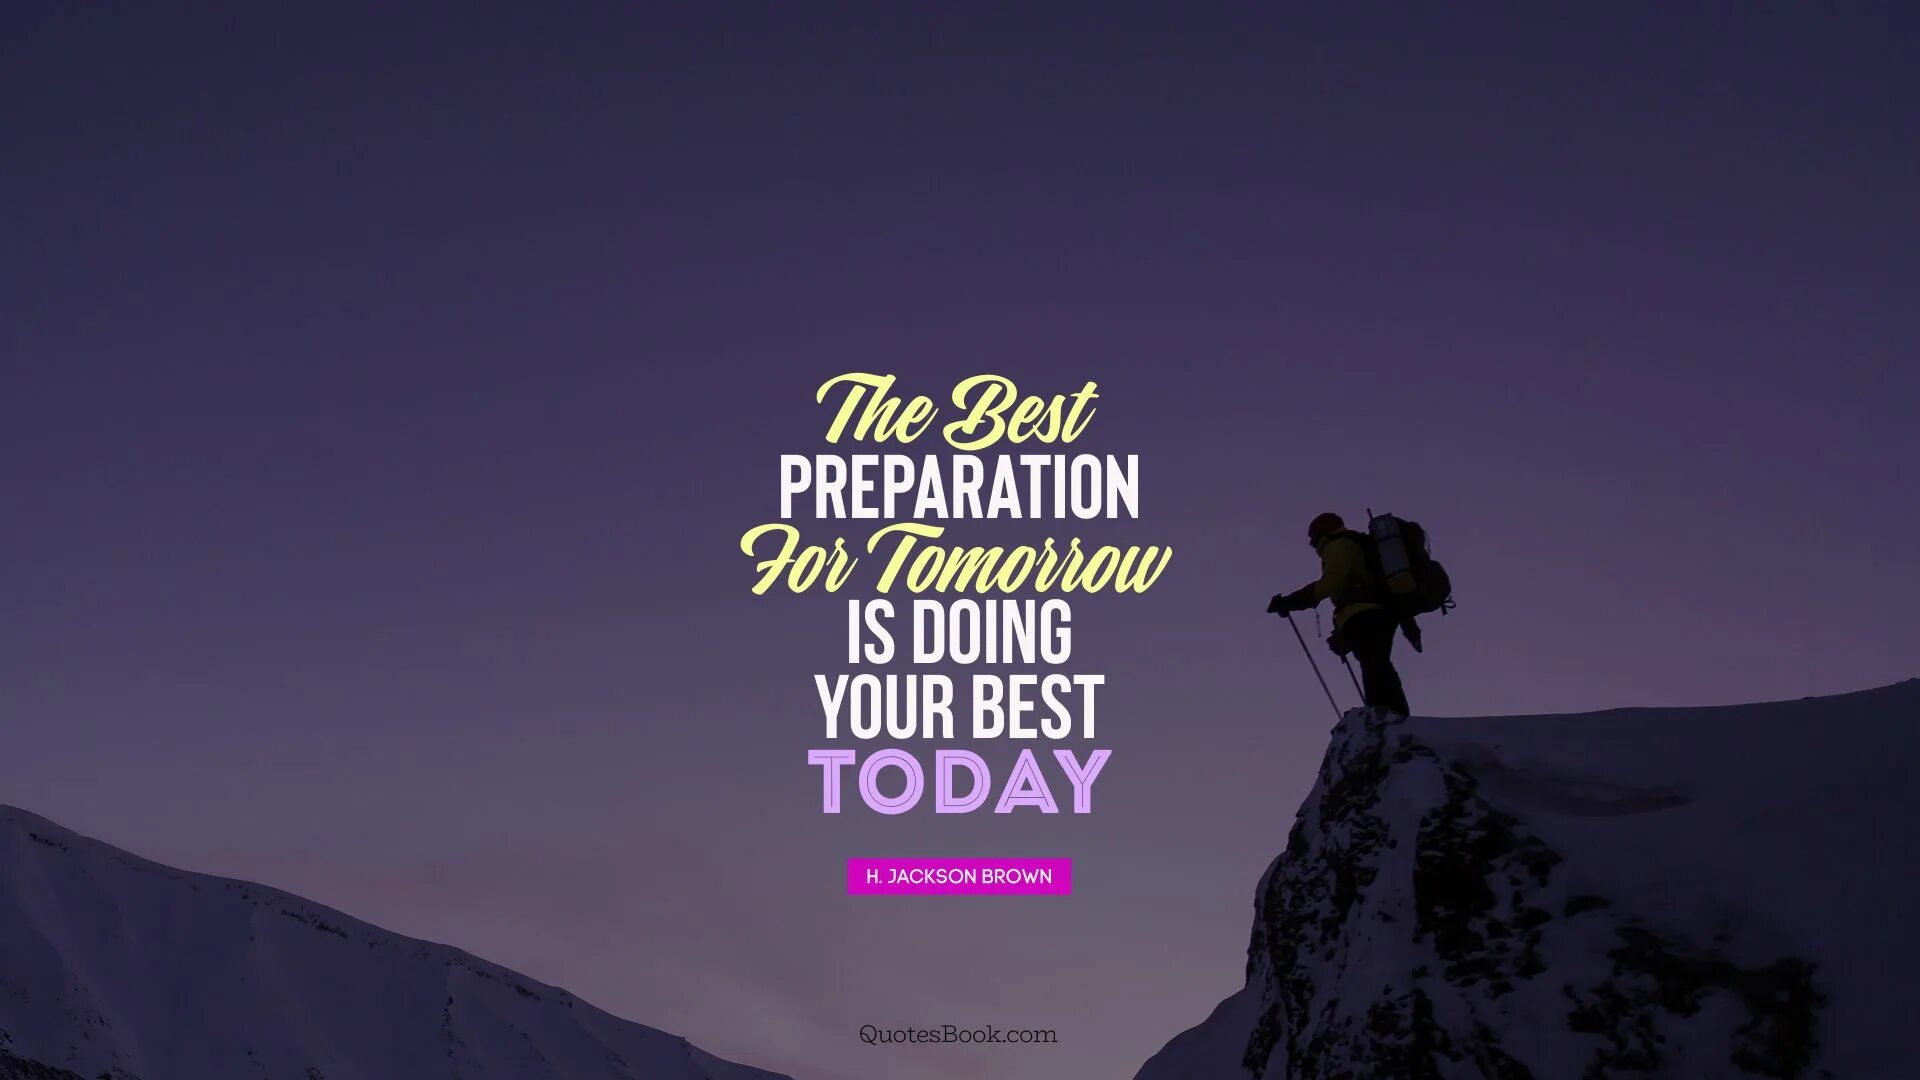 Best today. The best preparation for tomorrow is doing your best today. Doing your best. The best preparation for tomorrow is. Today is the best высказывание.